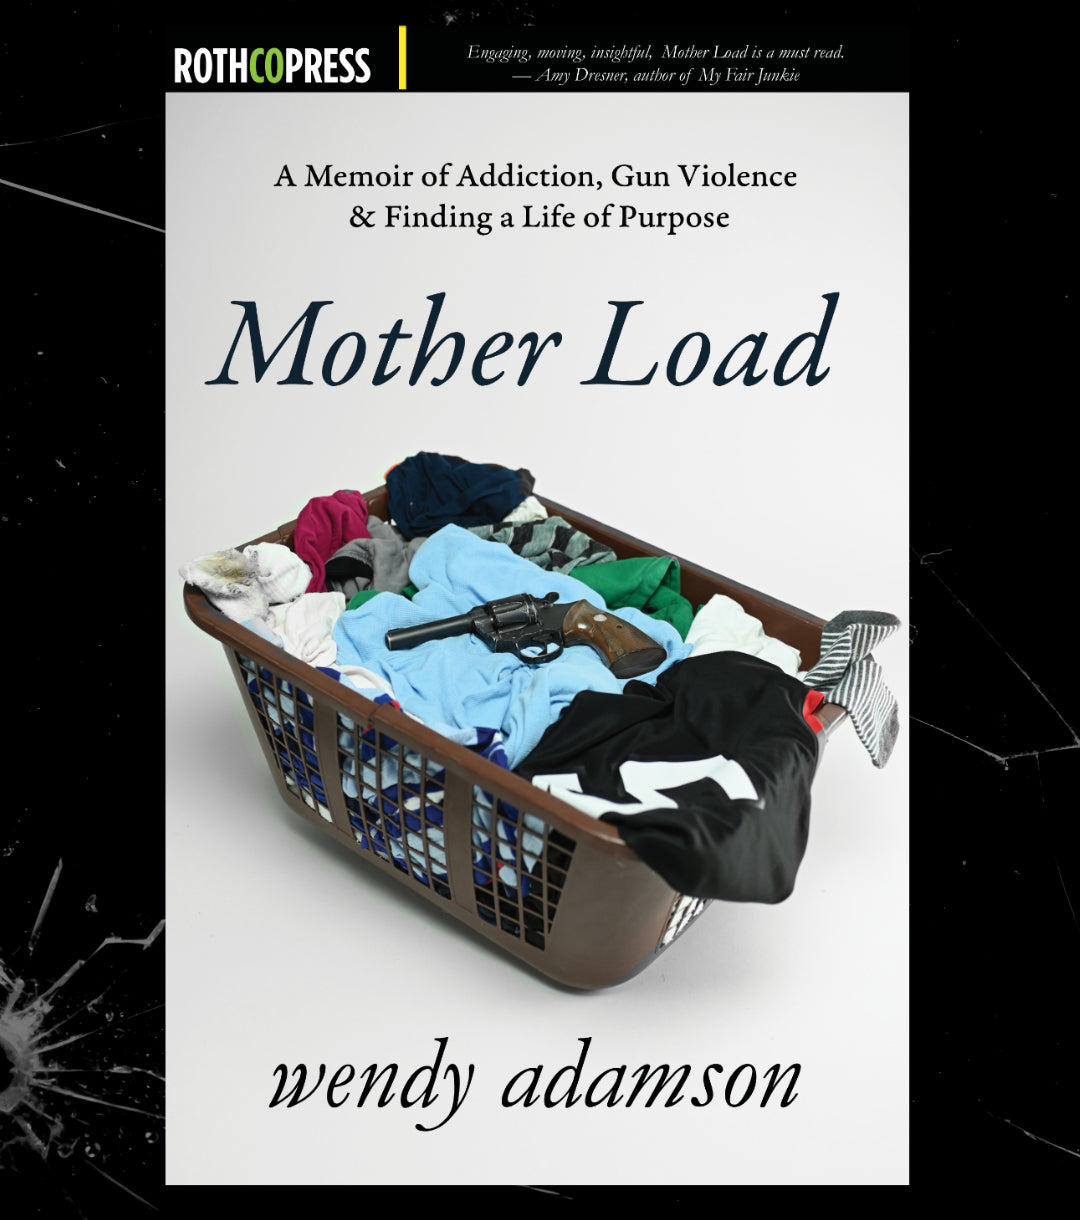 Mother Load A Memoir of Addiction, Gun Violence and Finding a Life of Purpose by Wendy Adamson - Paperback